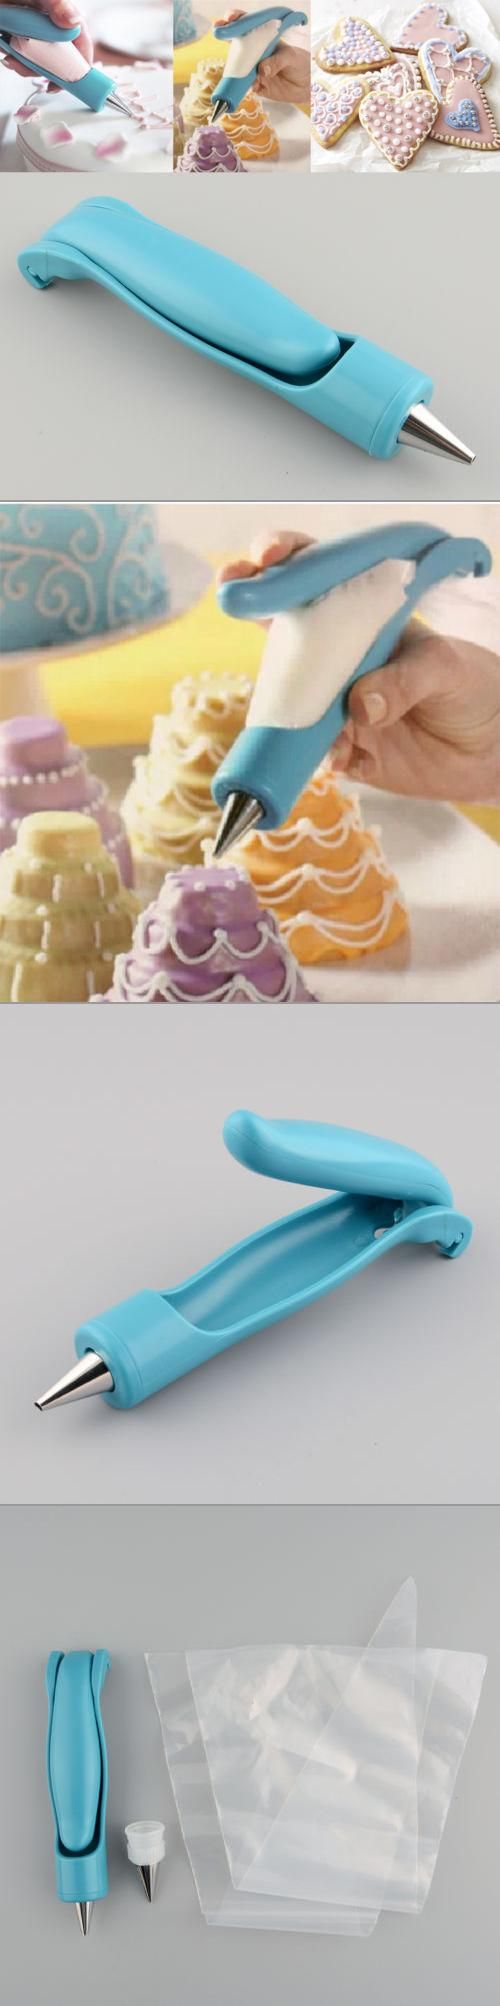 Wish you had just a bit more control over the pastry bag when decorating your favorite cake, or piping icing onto cookies? Now you can fill your pastry bag with icing, and load it into this nifty holder, giving you control, precision, and less mess! Great for kids and beginners, it will have you decorating your favorite cake and cookies like a pro in no time!